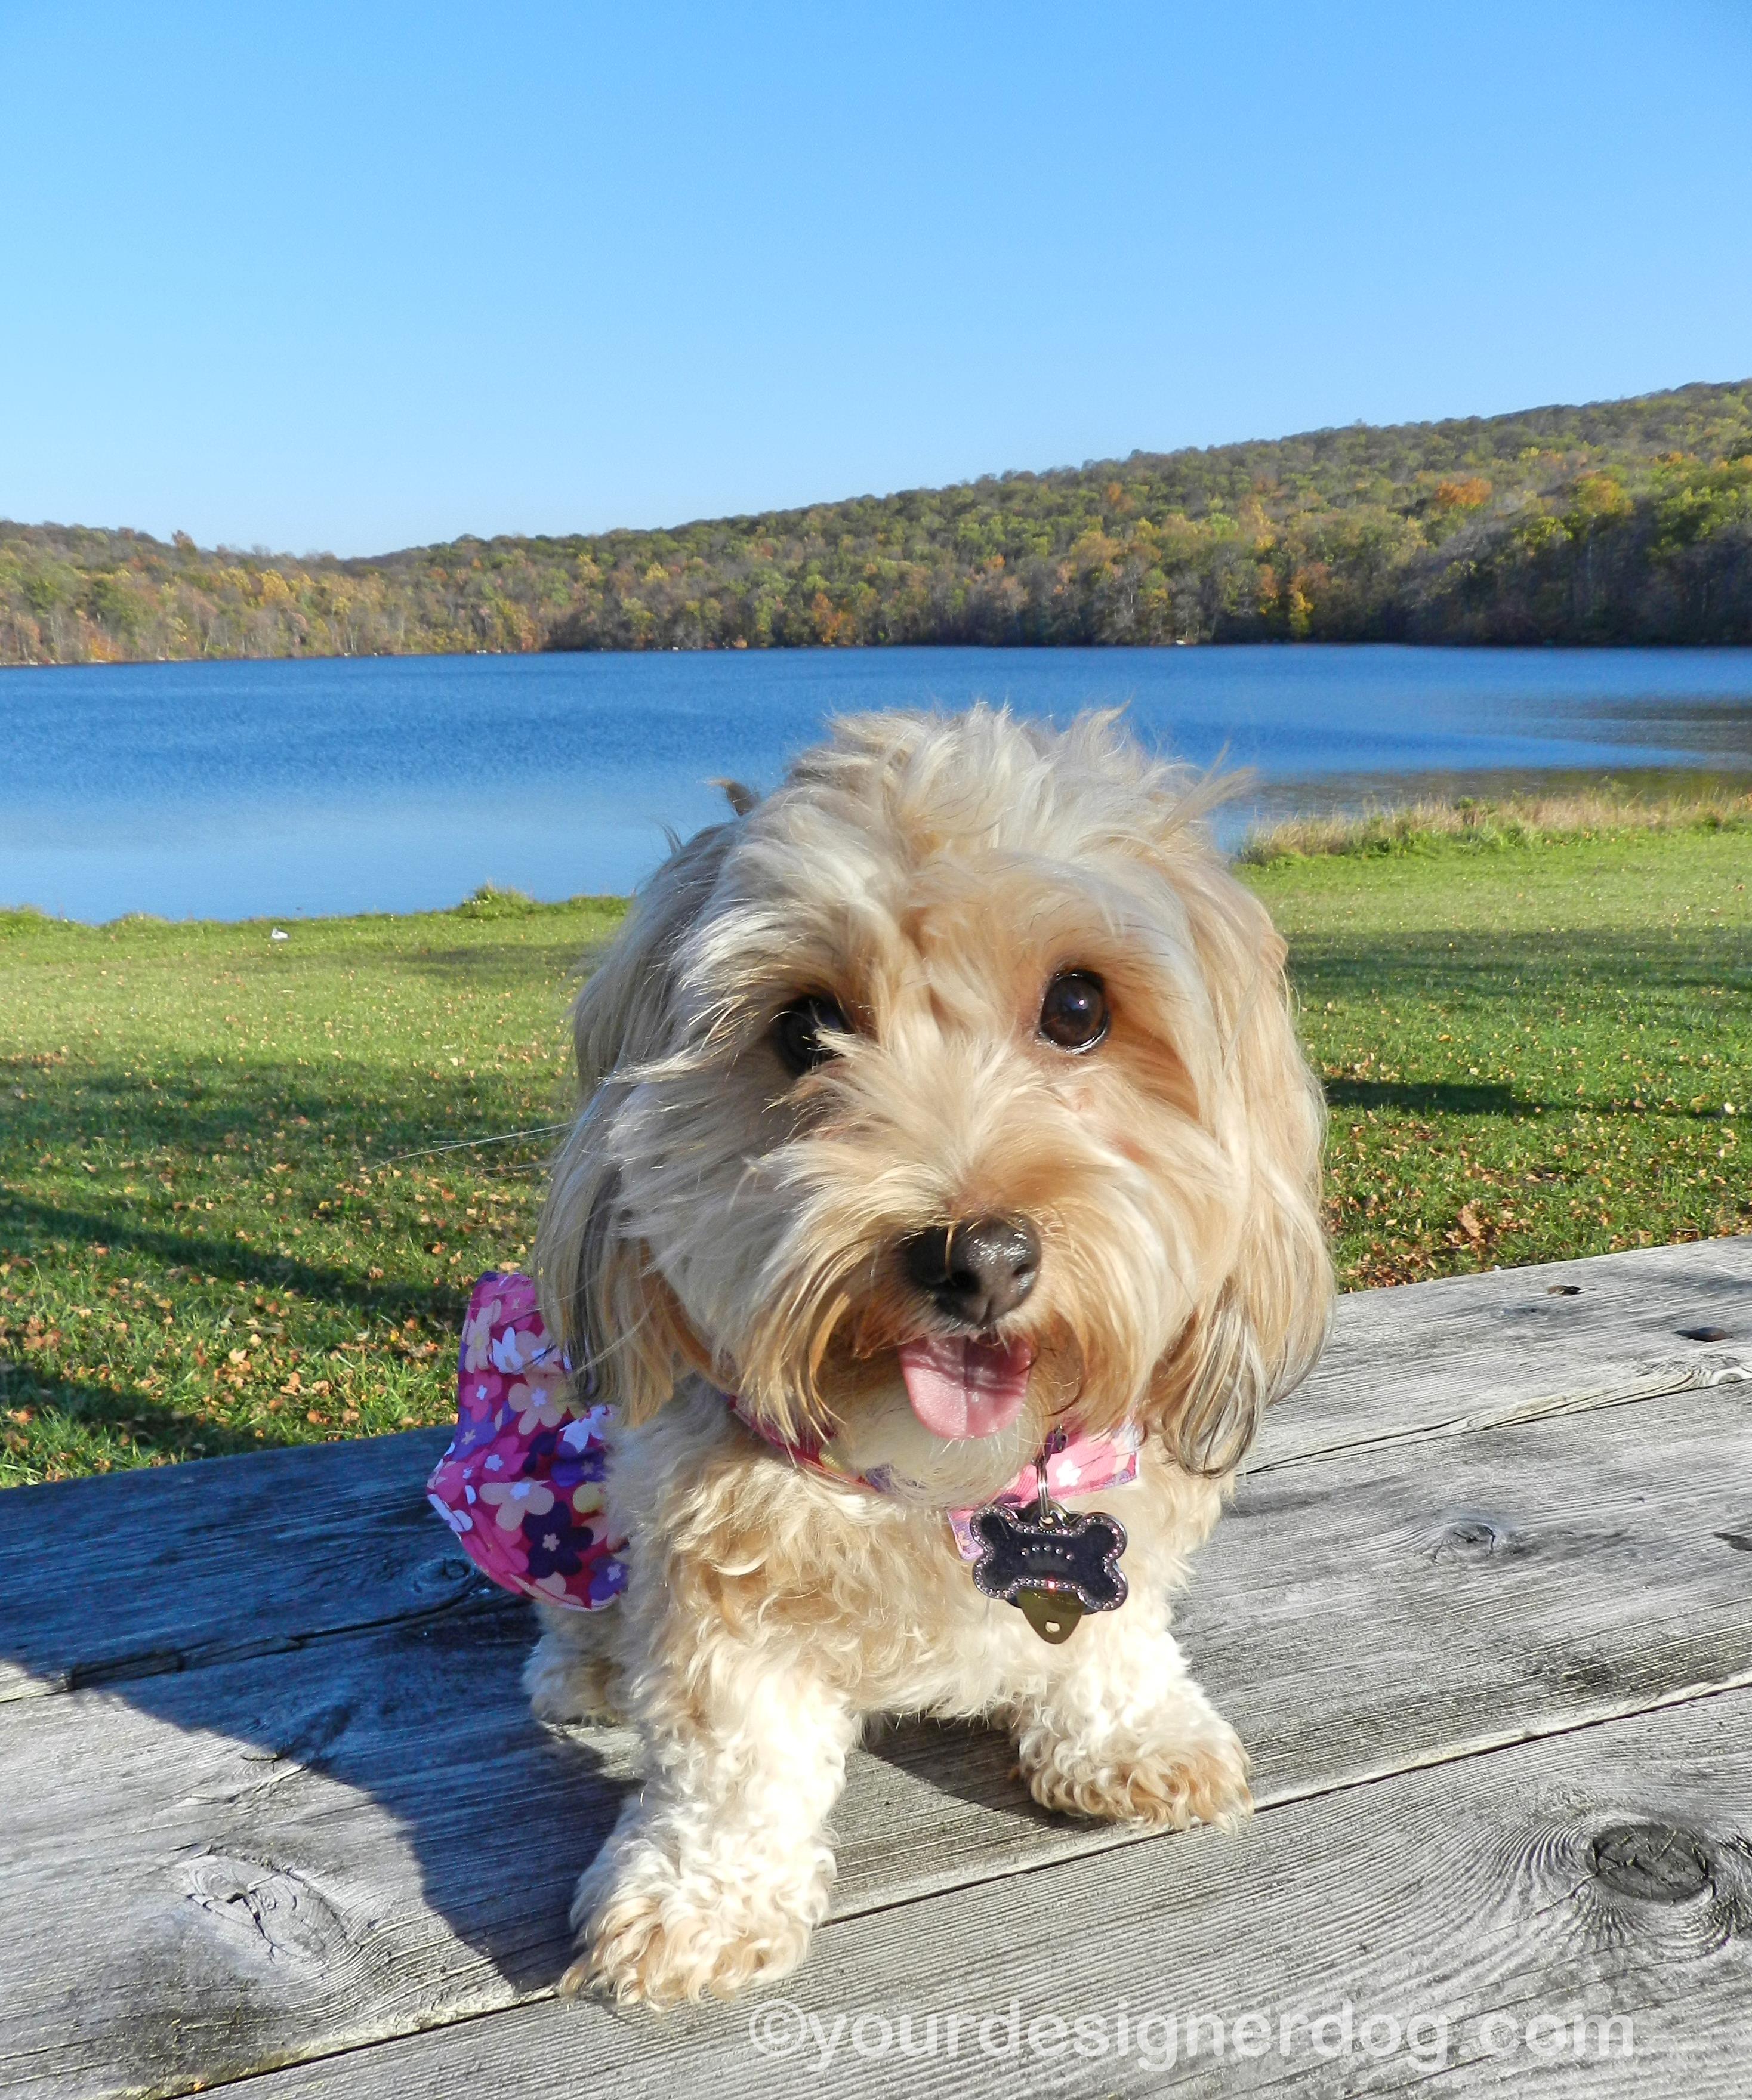 dogs, designer dogs, Yorkipoo, yorkie poo, lake, tongue out, autumn